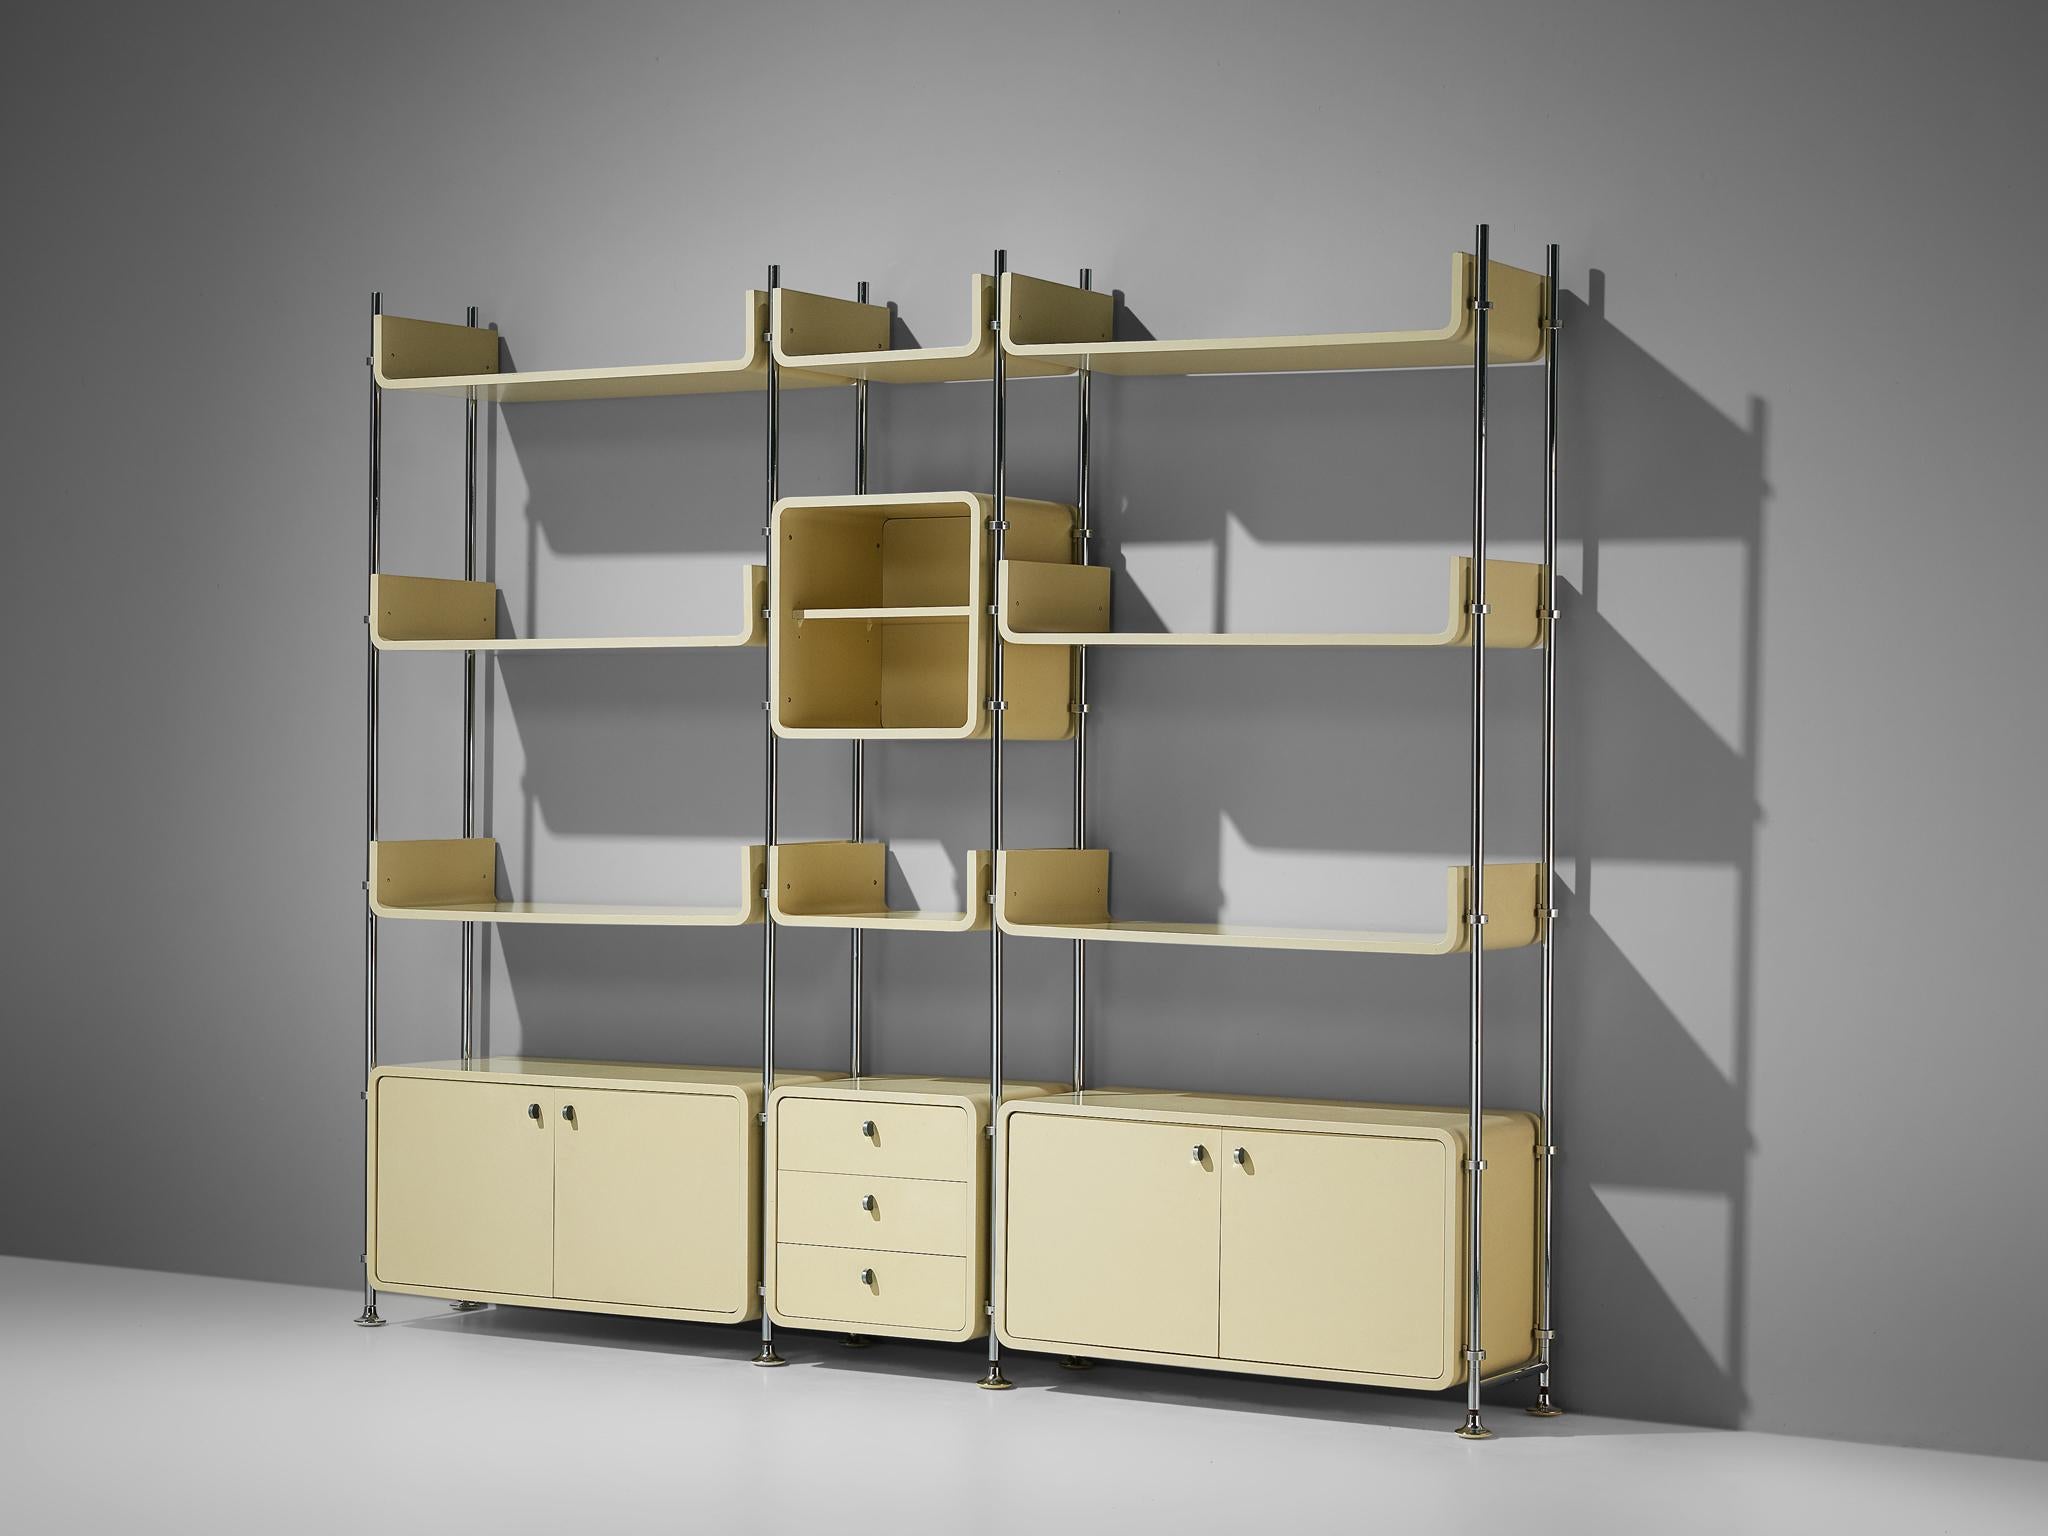 Michael Ducaroy, free-standing wall unit, steel, lacquered wood, France, 1970s

Michael Ducaroy designed this free-standing wall unit in the 1970s. In three columns are three closed cabinet, one open cabinet and eight shelves to find. The cream